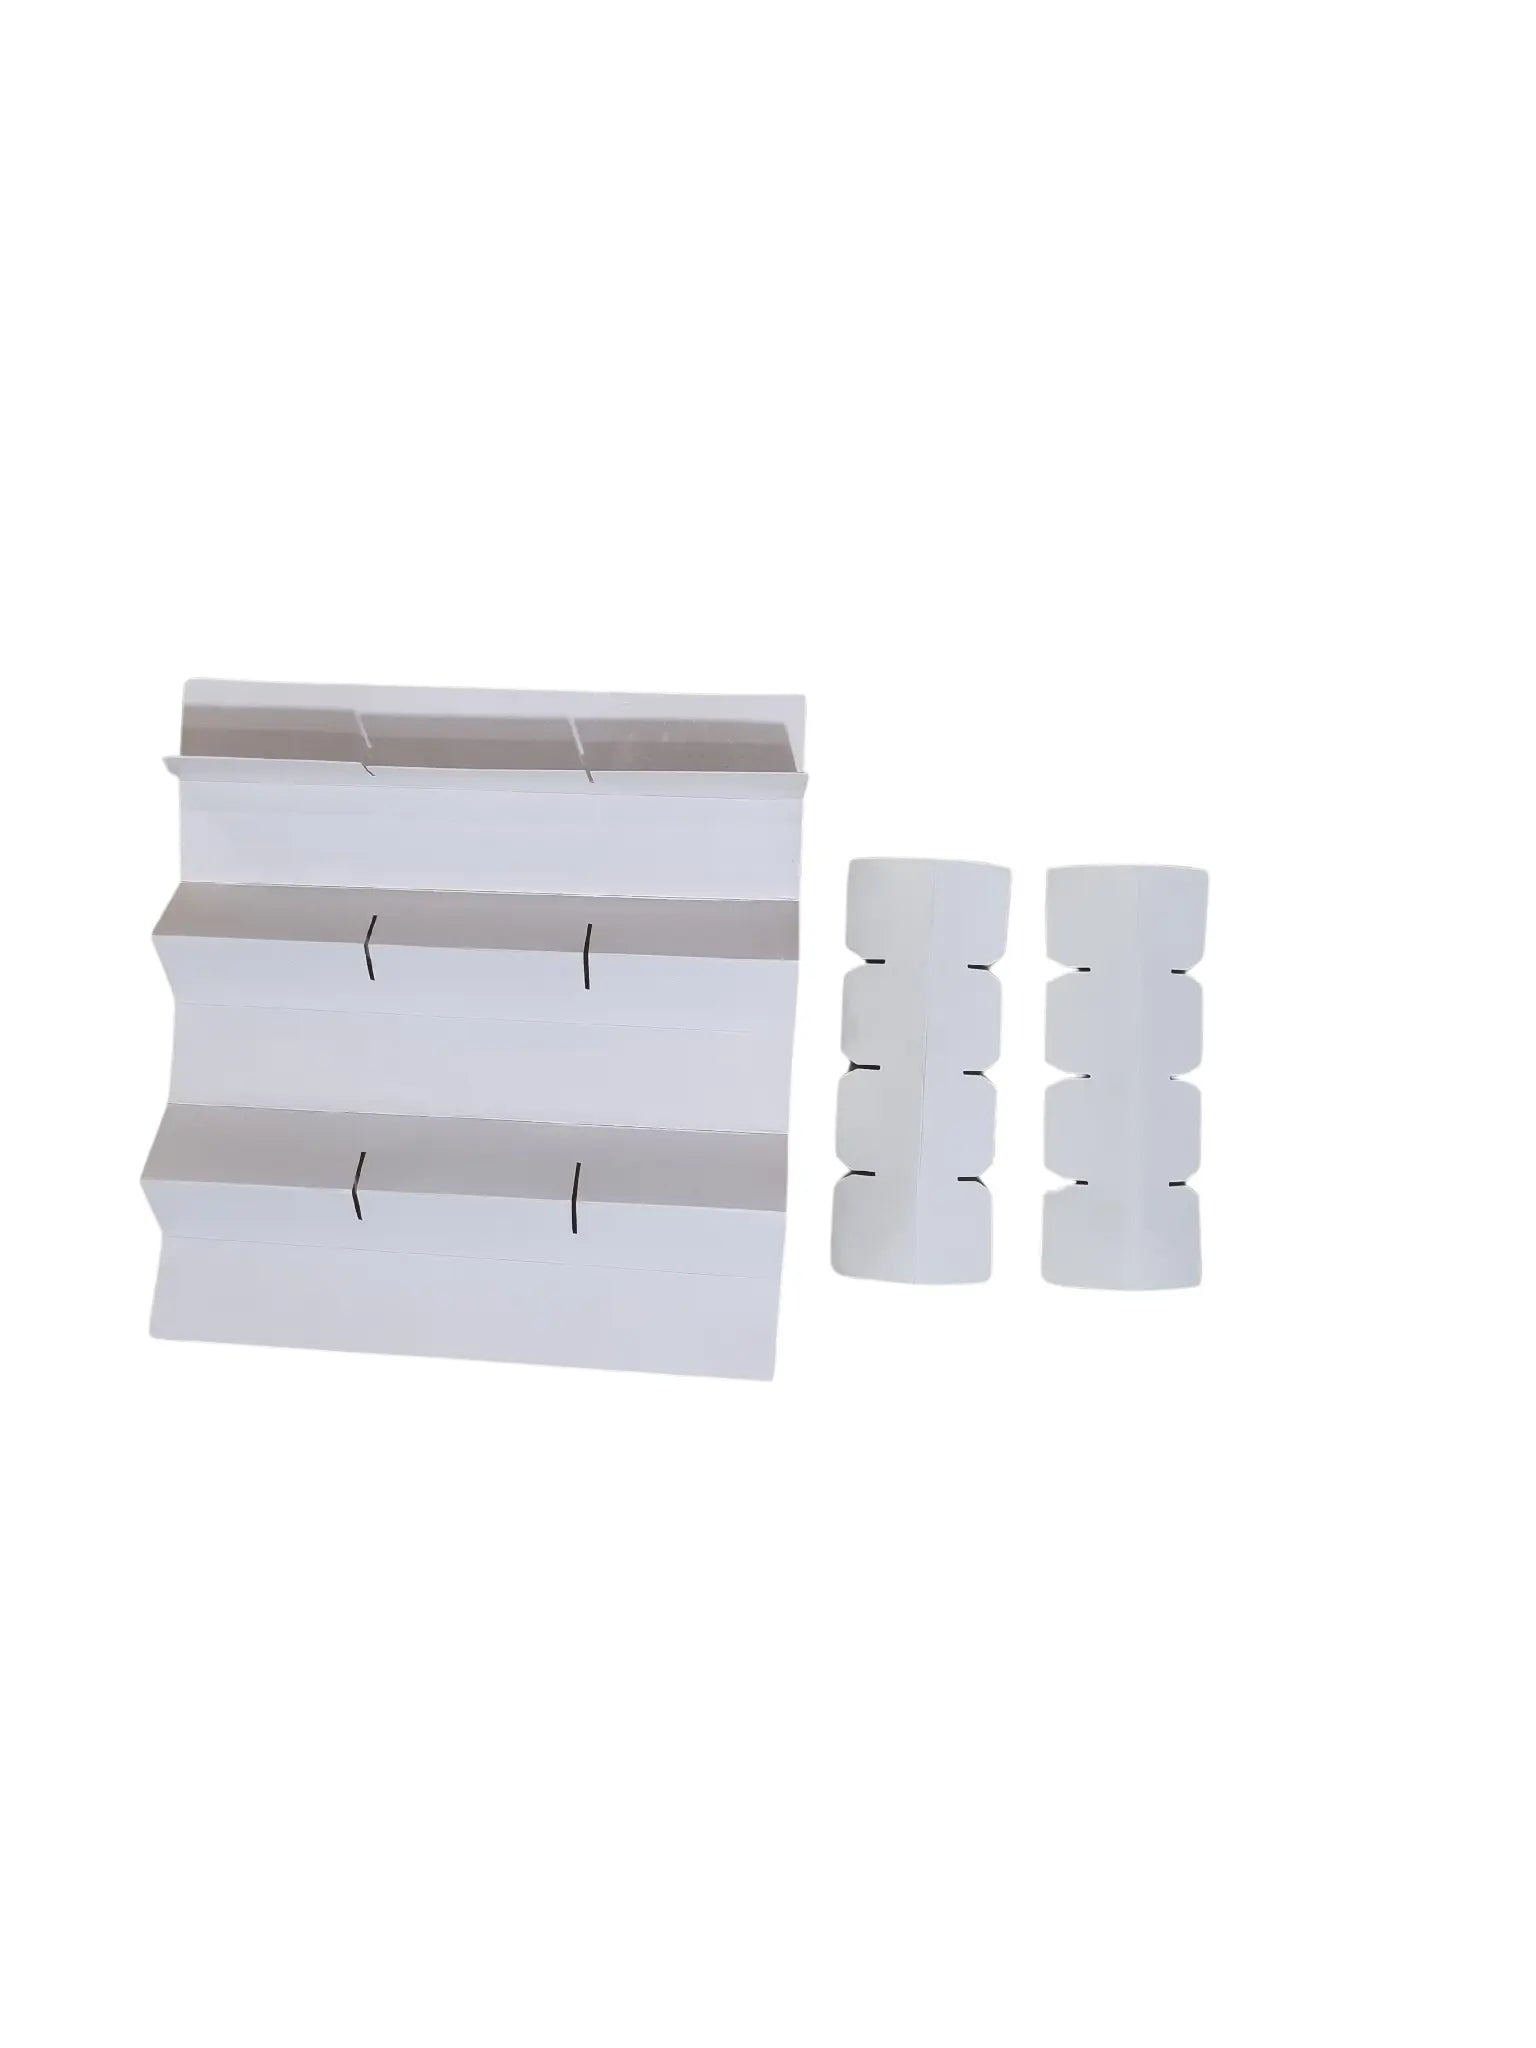 12-compartment inner draw box with full-color and full-gloss